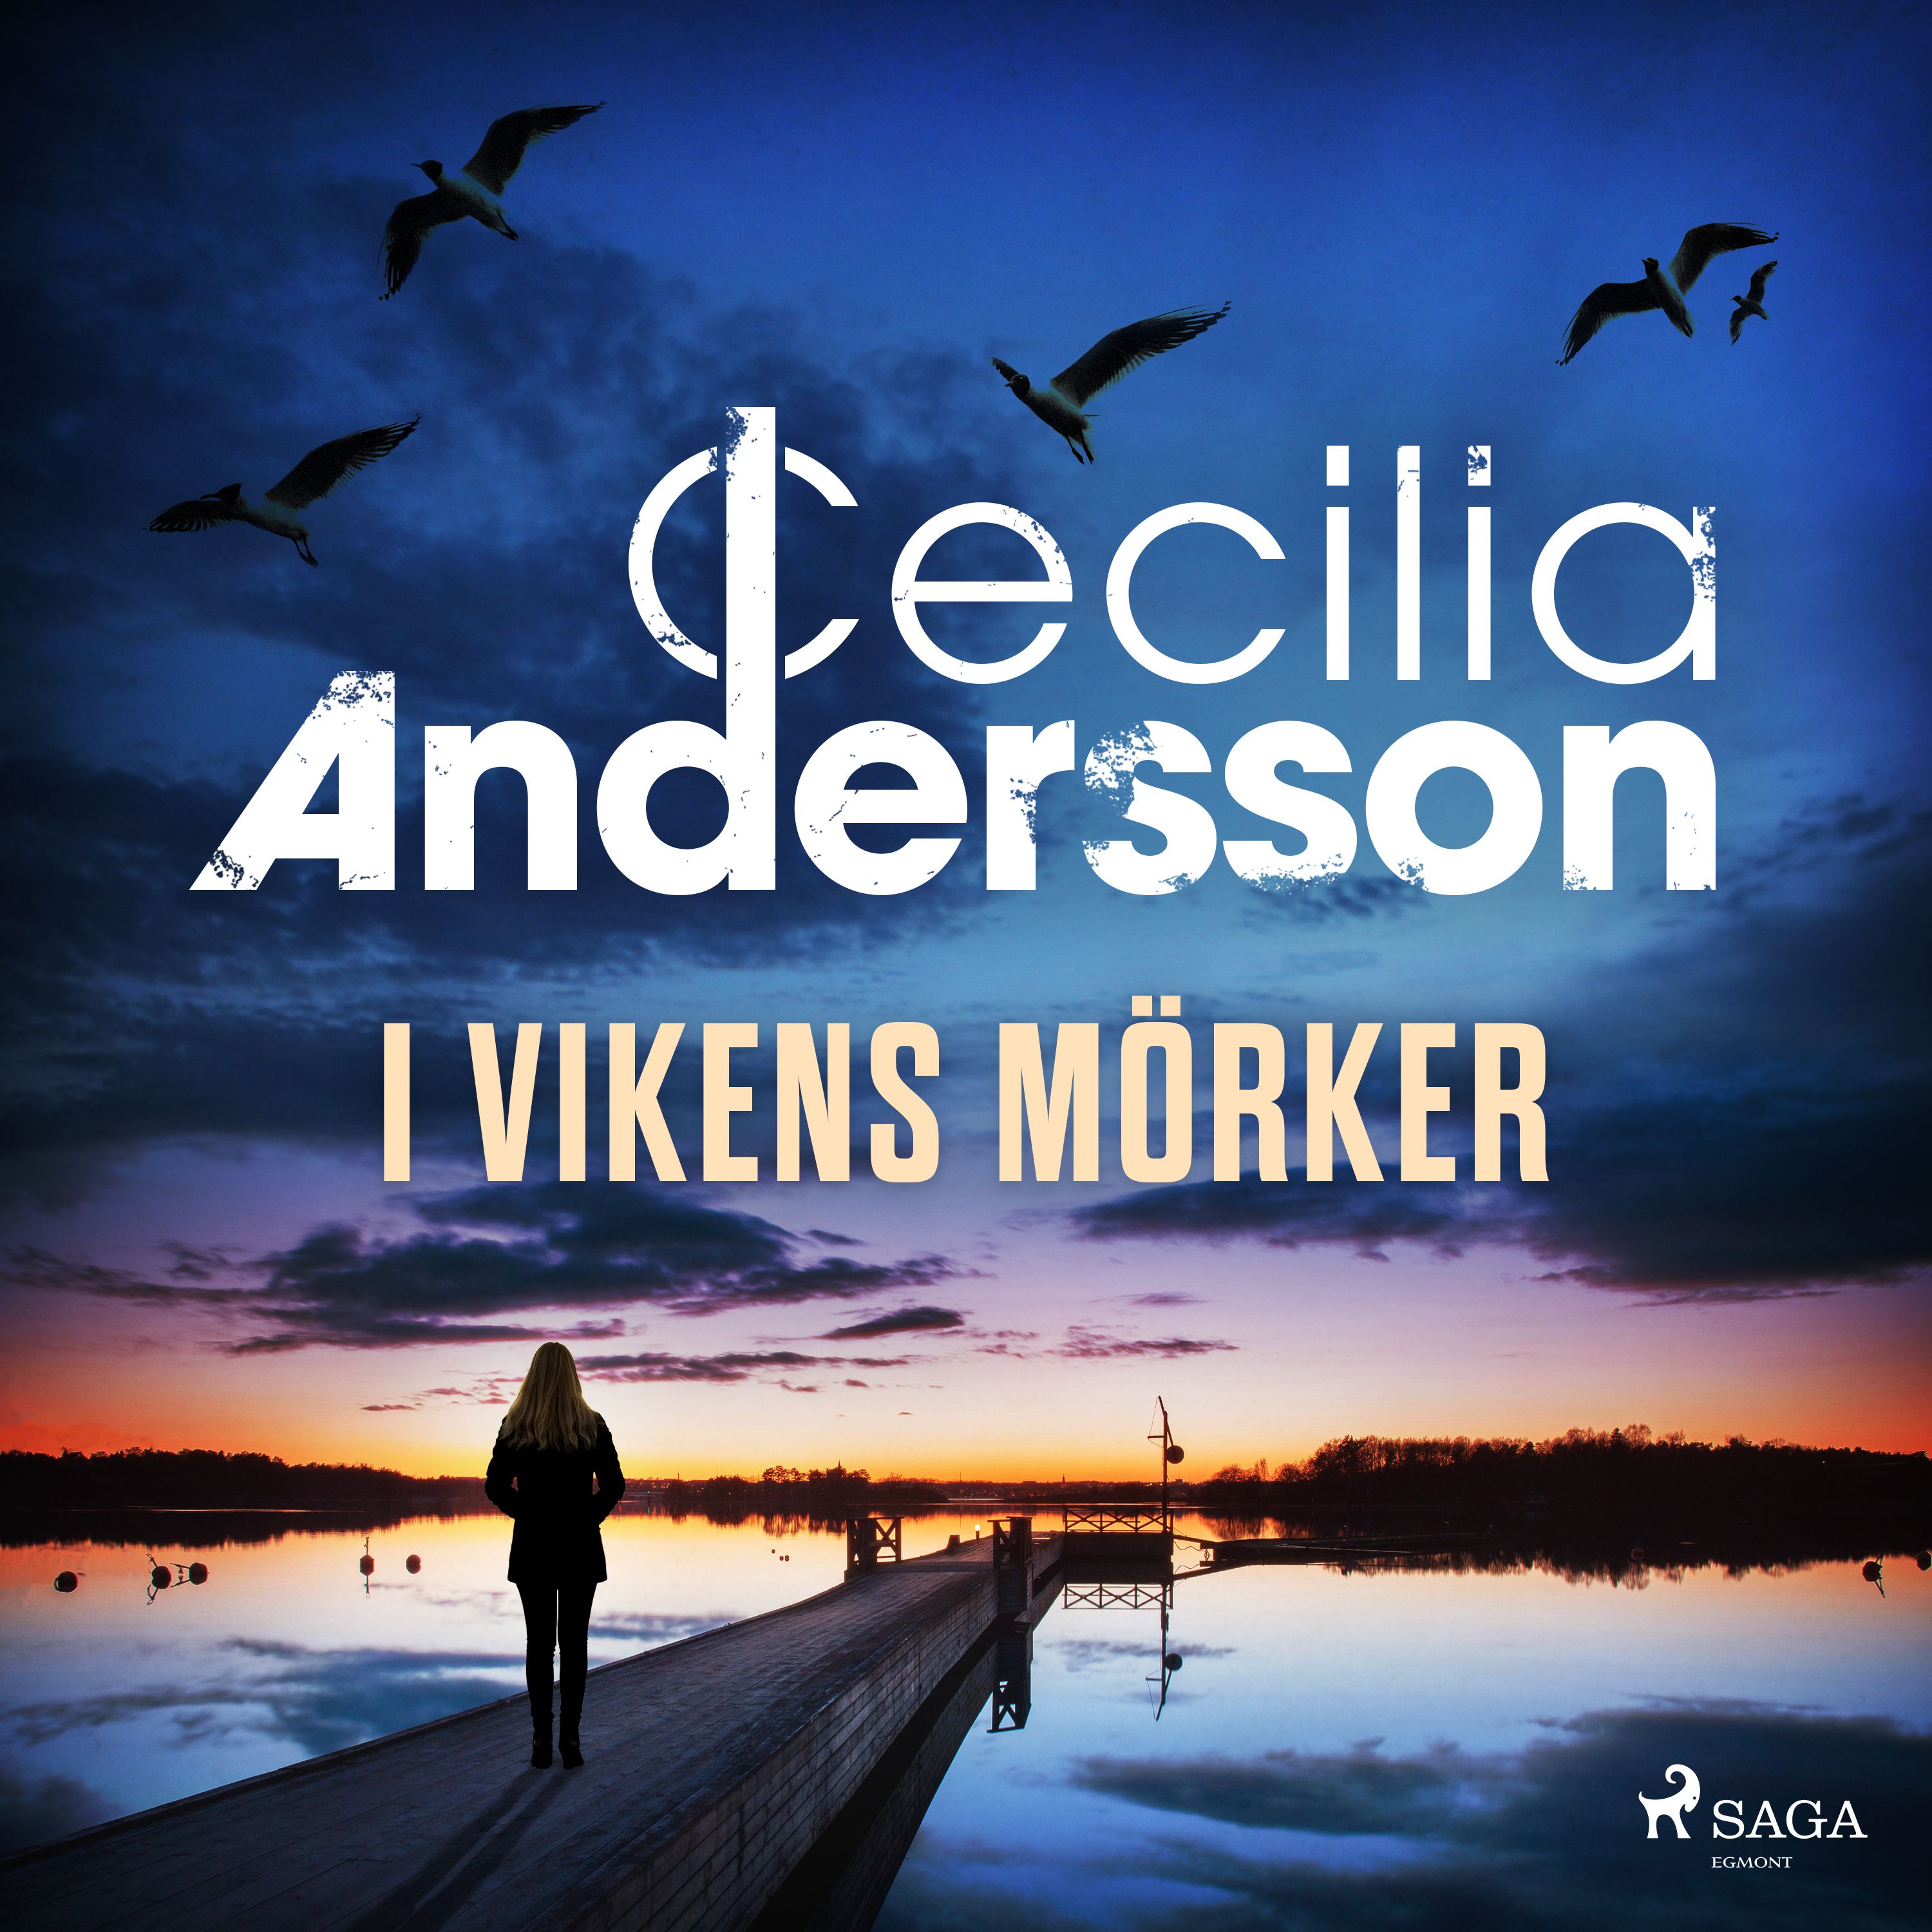 I vikens mörker, audiobook by Cecilia Andersson